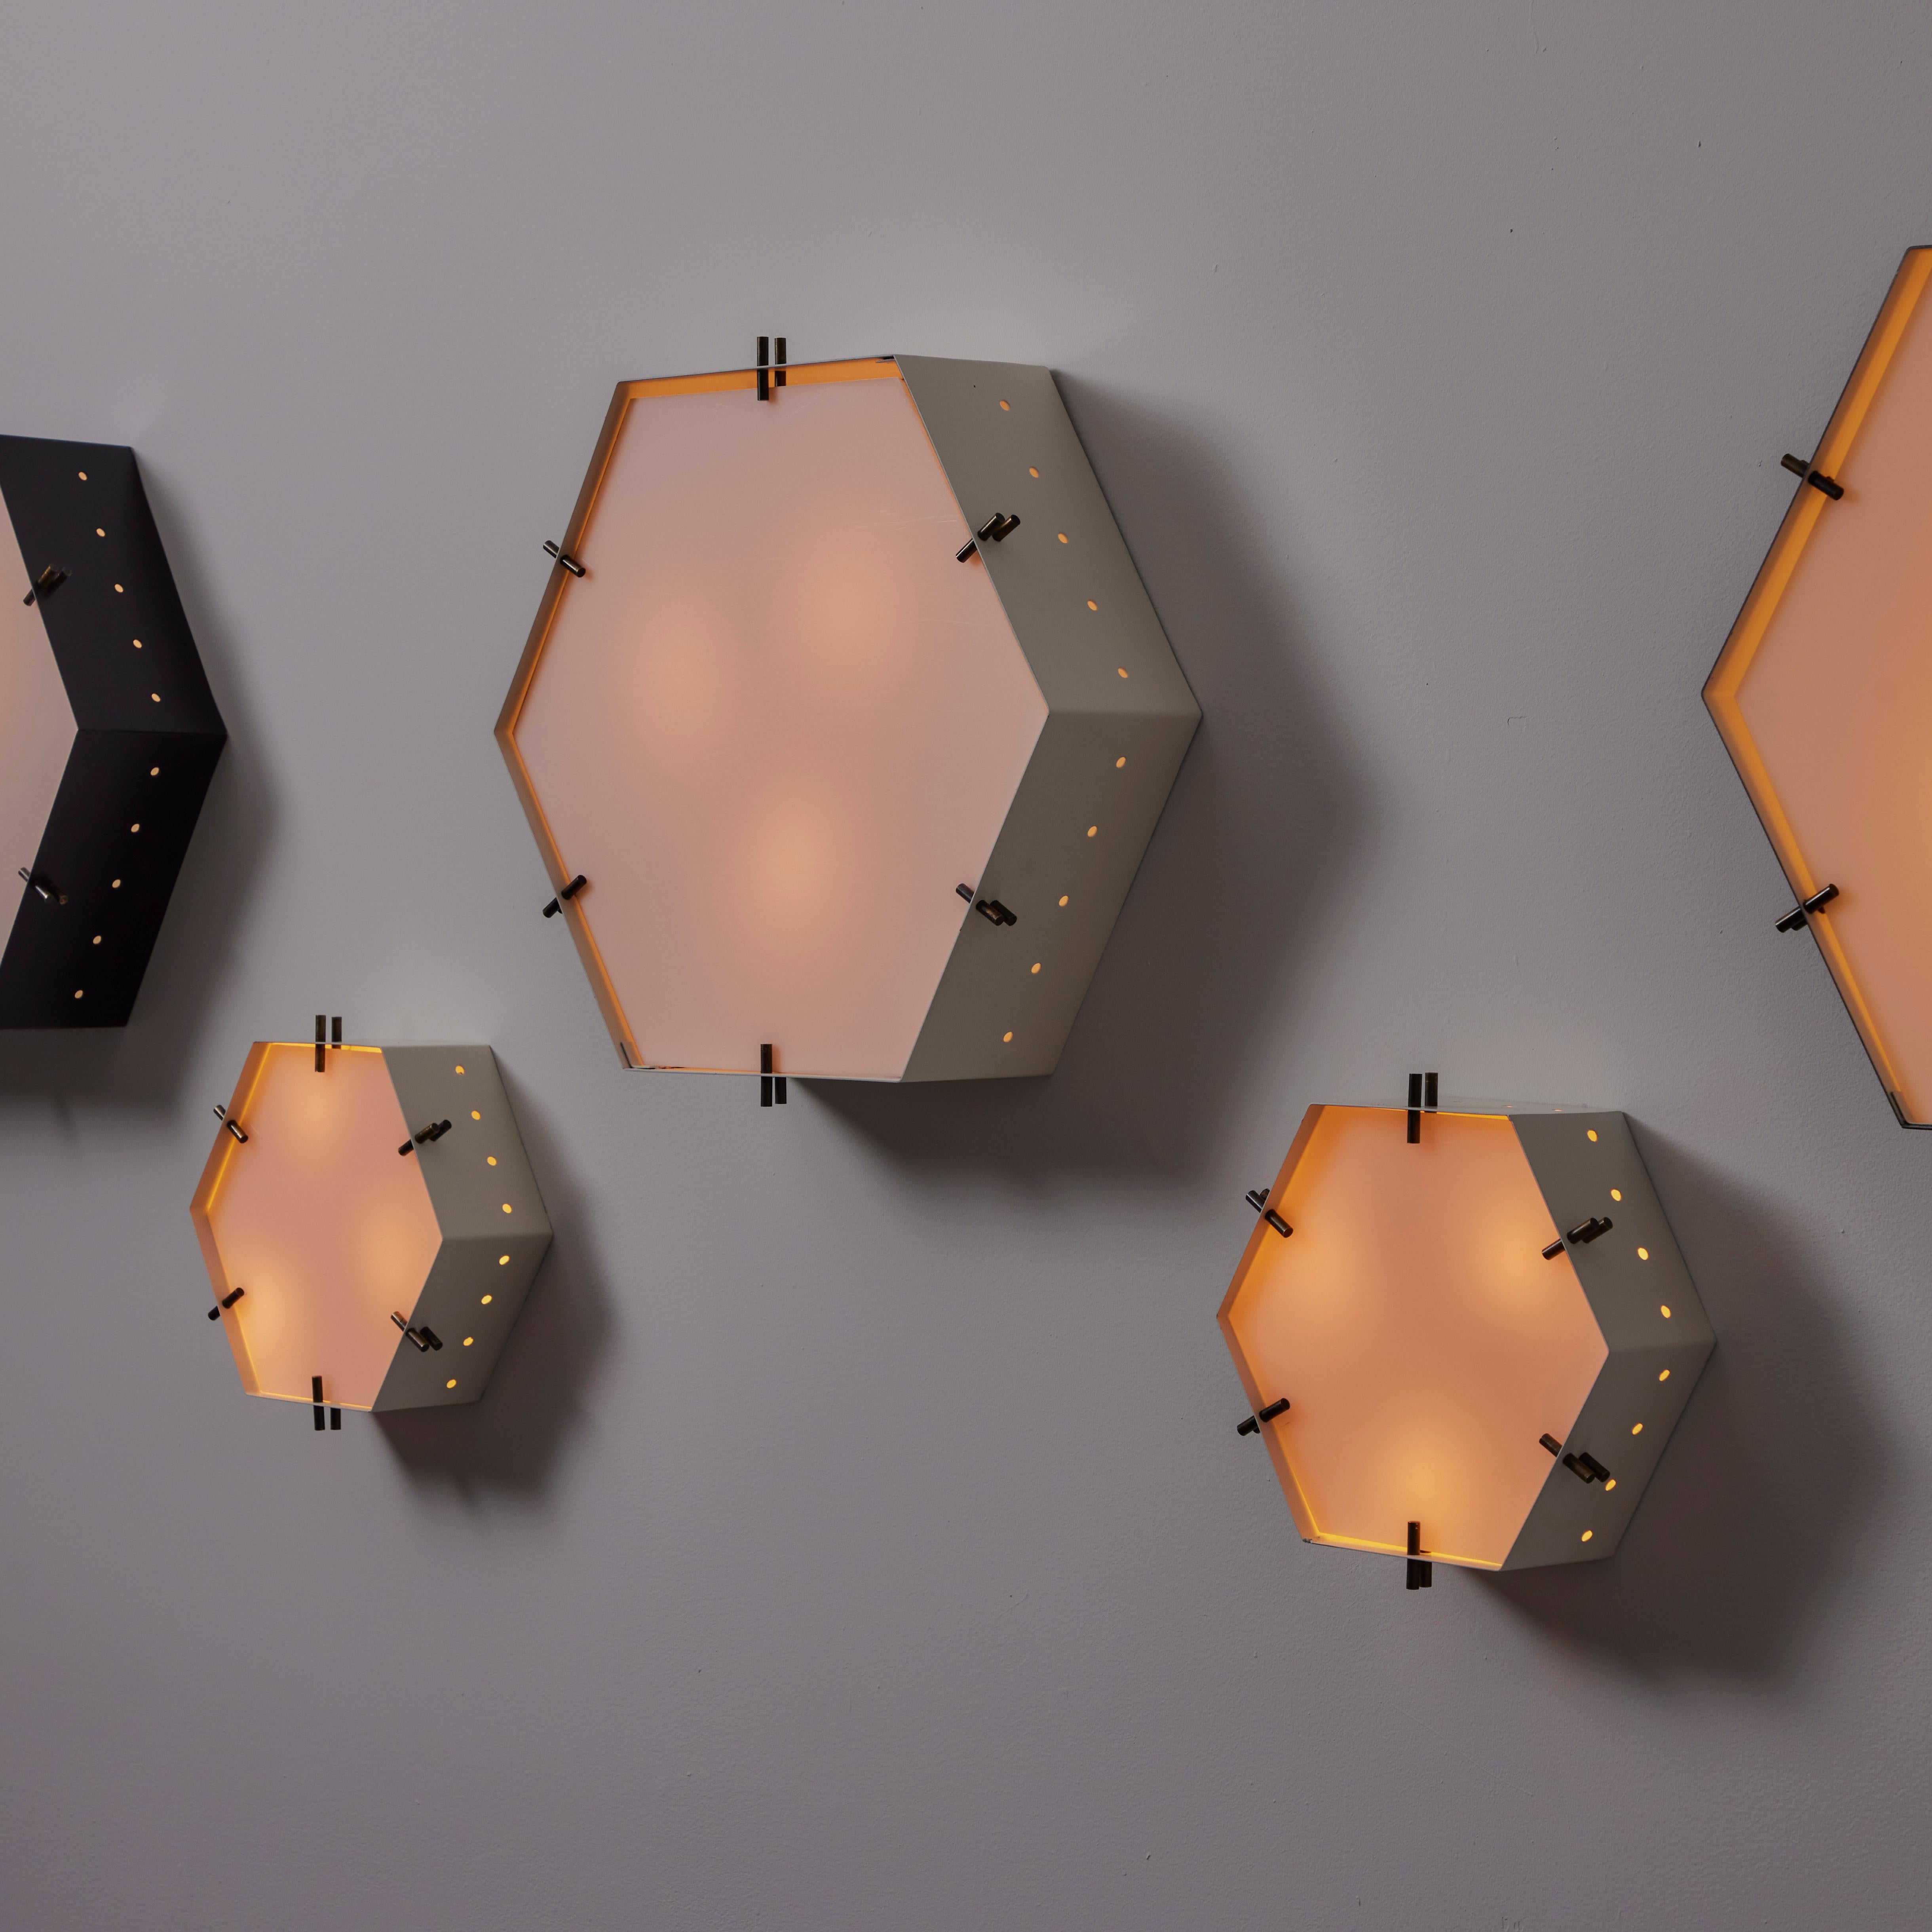 Single Small wall or ceiling light by G.C.M.E. Designed and manufactured in Italy, circa the 1950s. Hexagonal enameled frames paired with frosted acrylic. The frame features perforation around the hexagons, allowing for added light display and